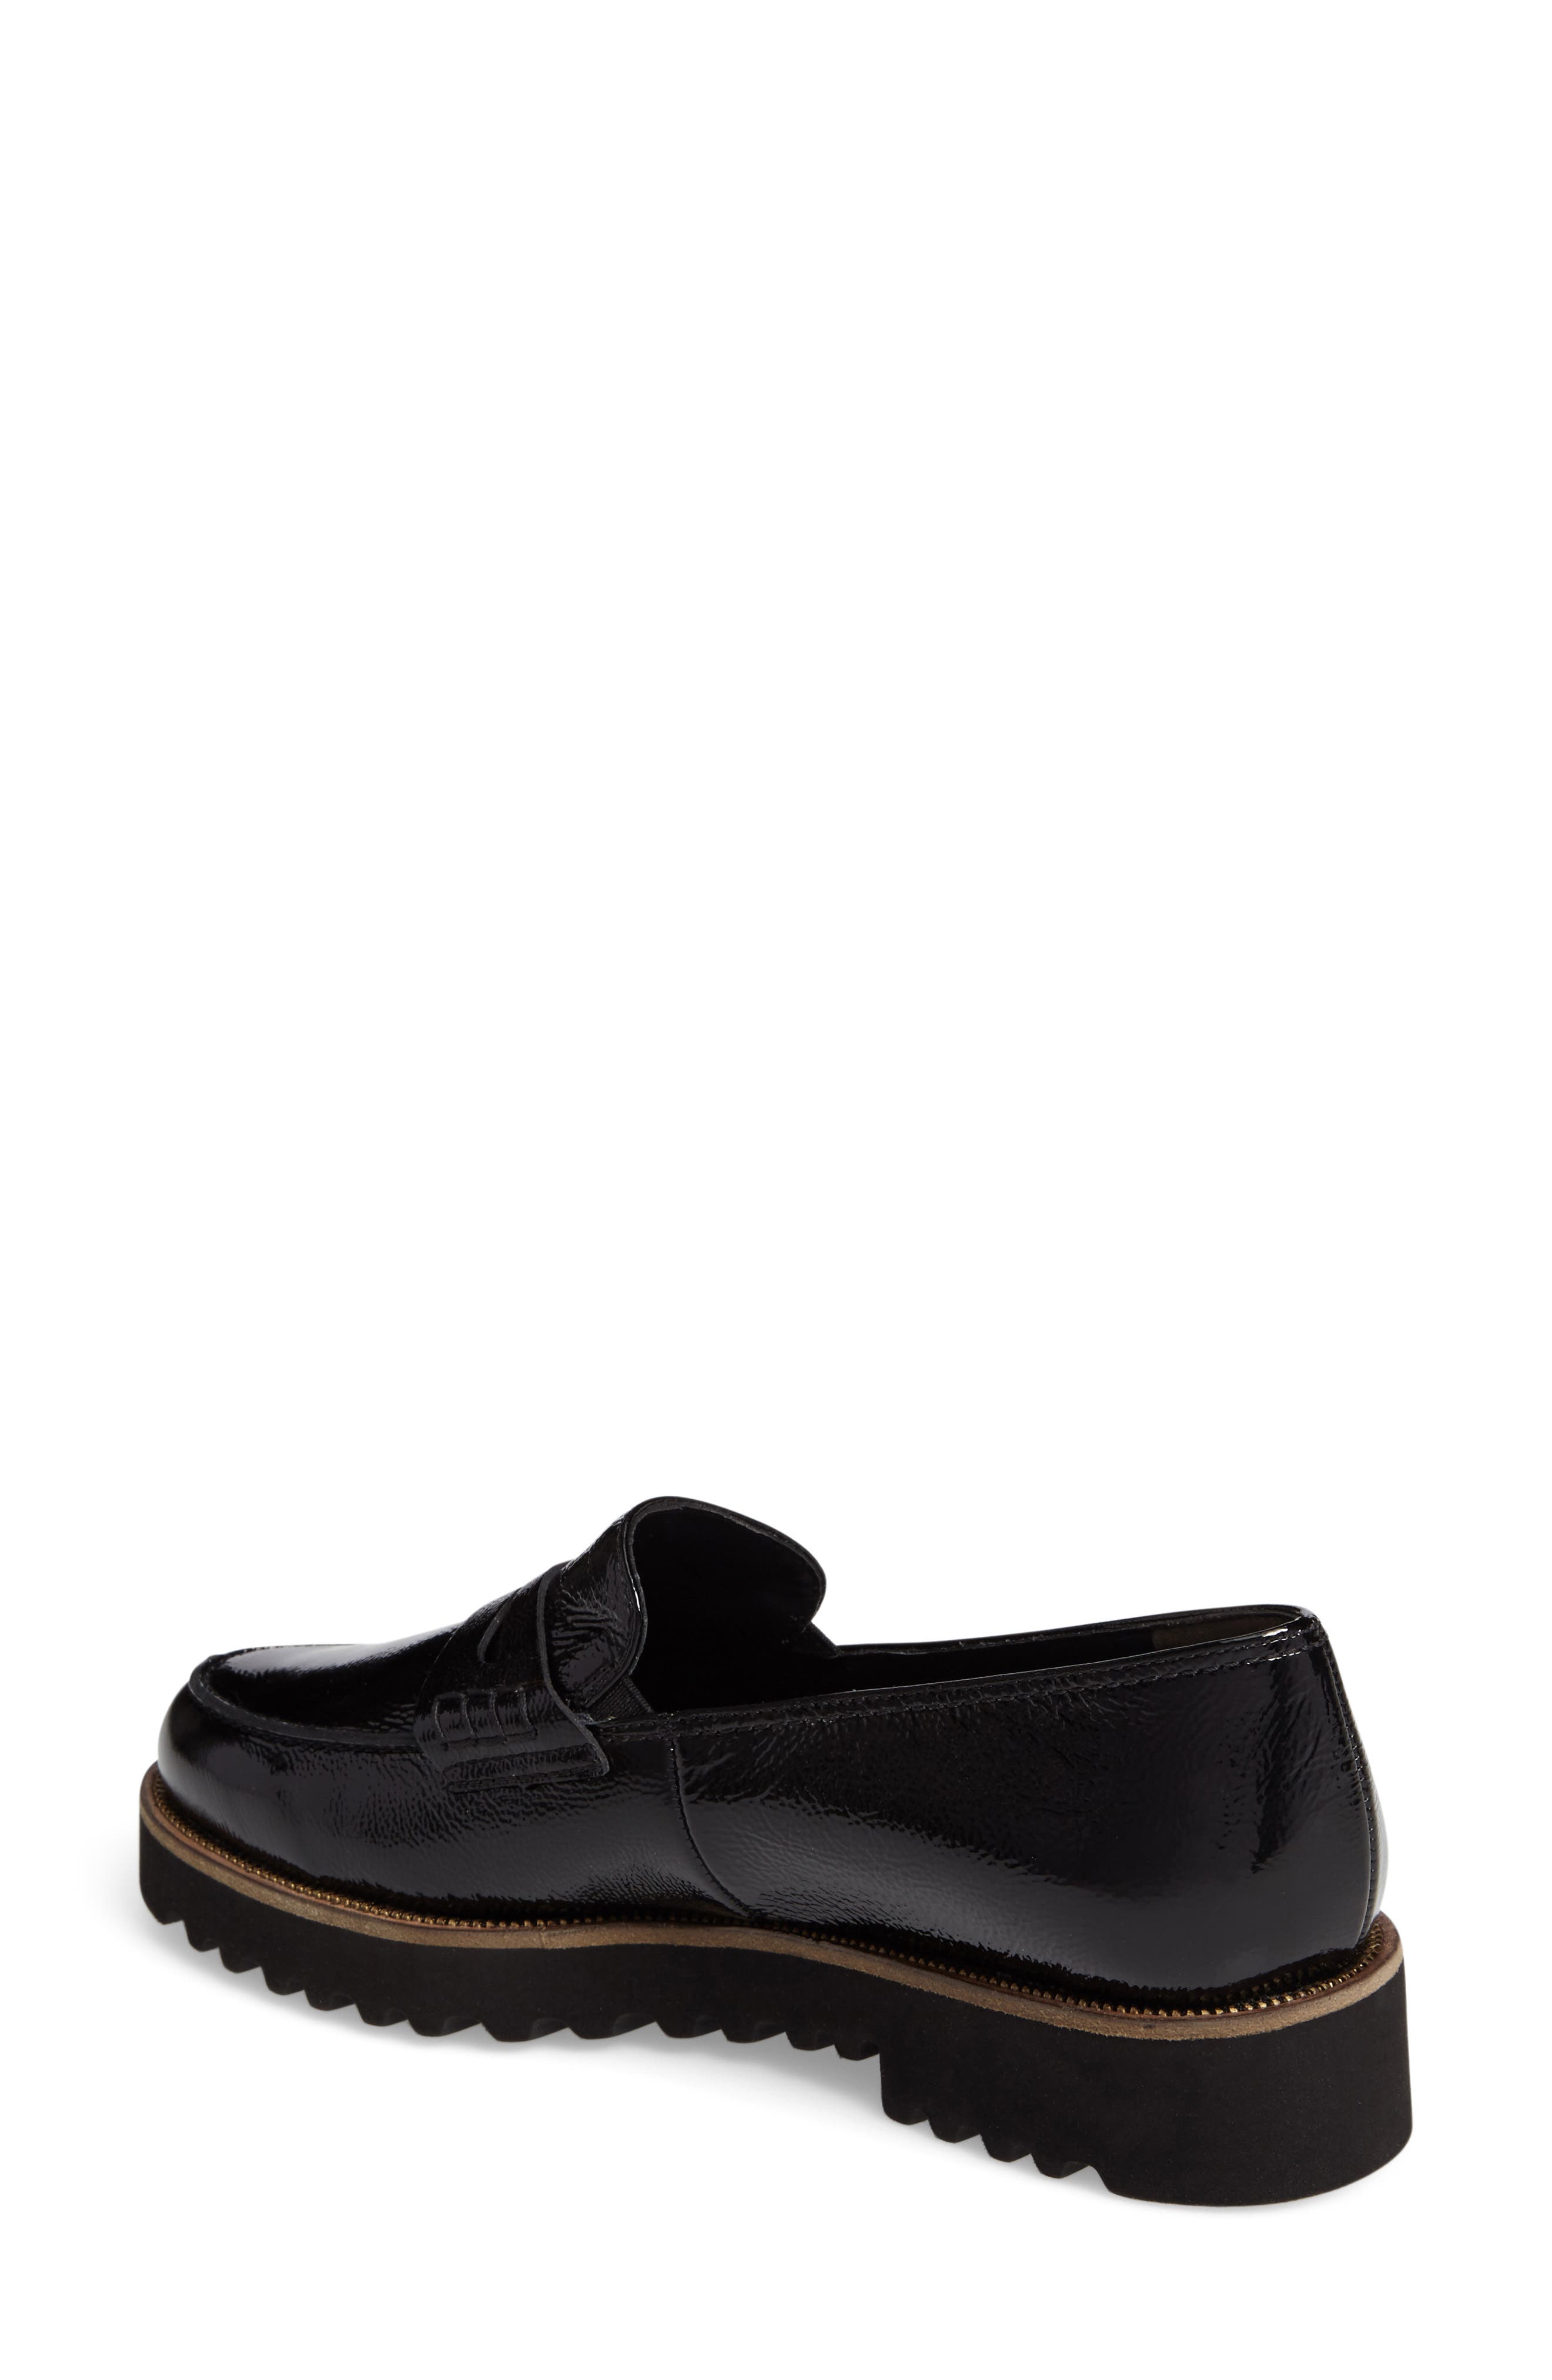 paul green loafers nordstrom